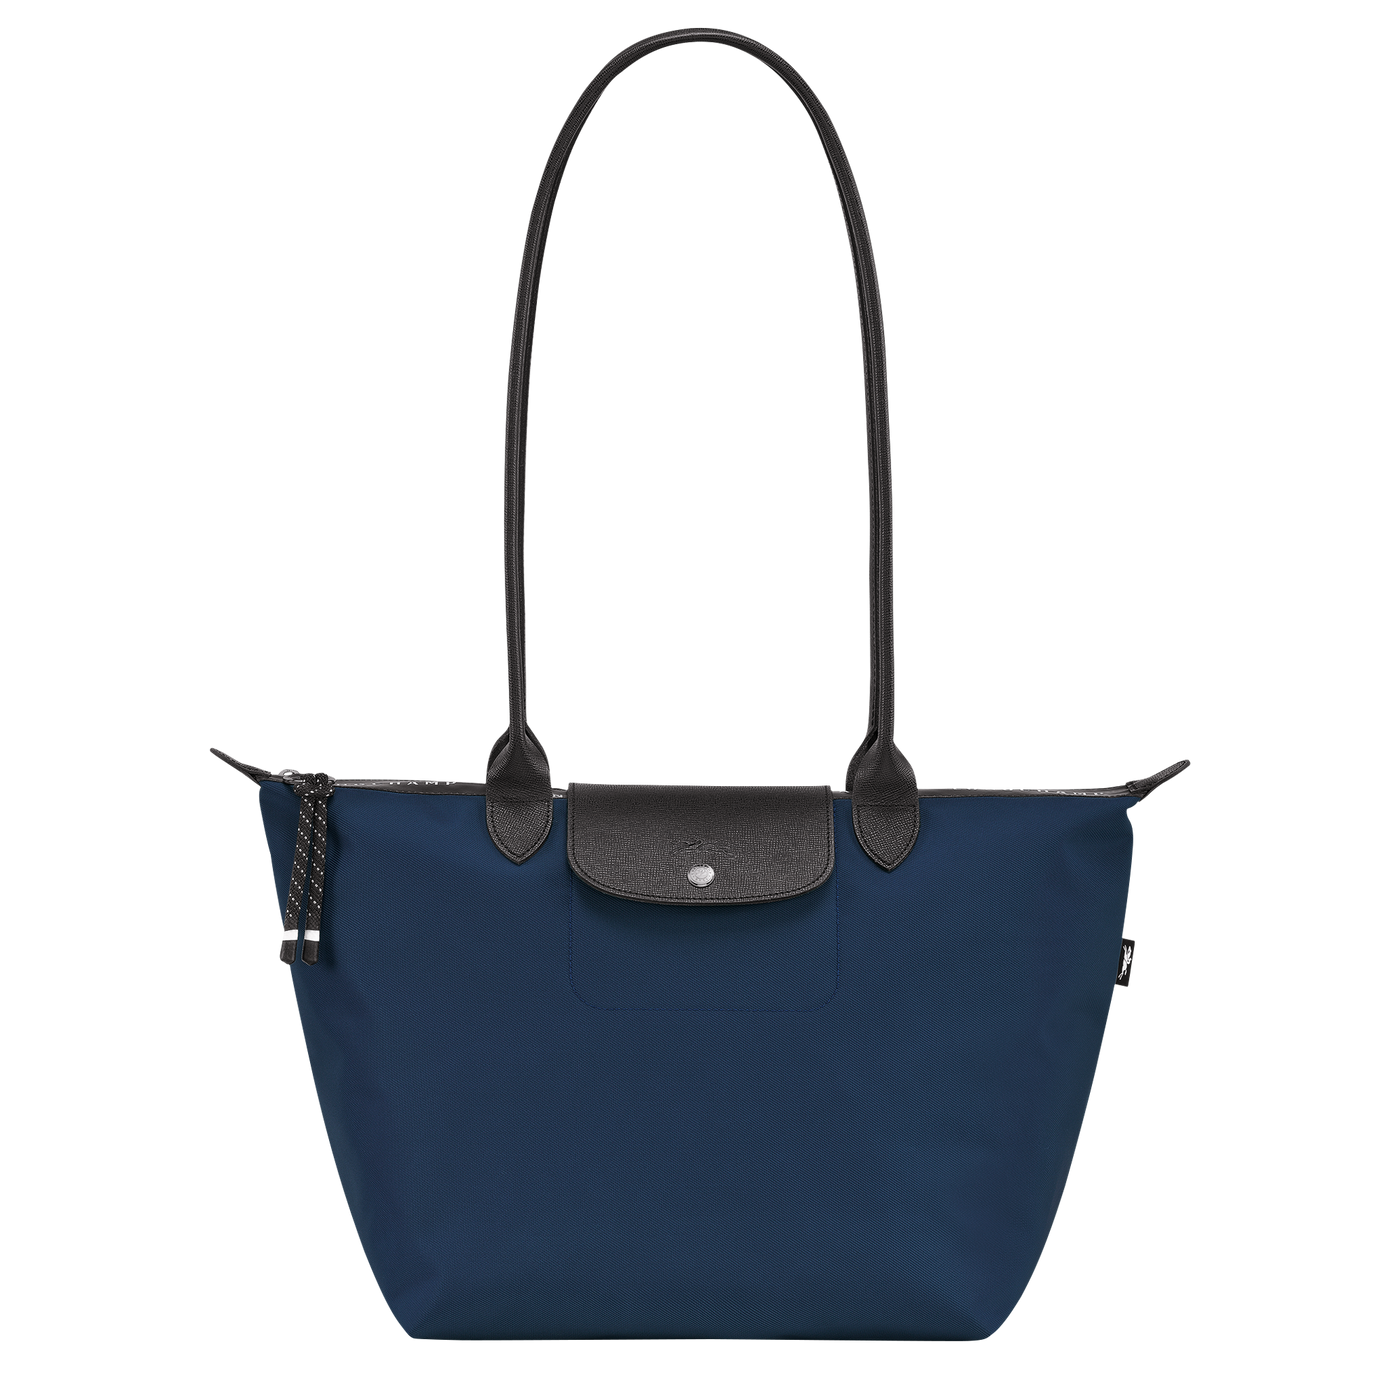 Shop The Latest Collection Of Longchamp Le Pliage Energy Tote Bag - 10163Hsr In Lebanon